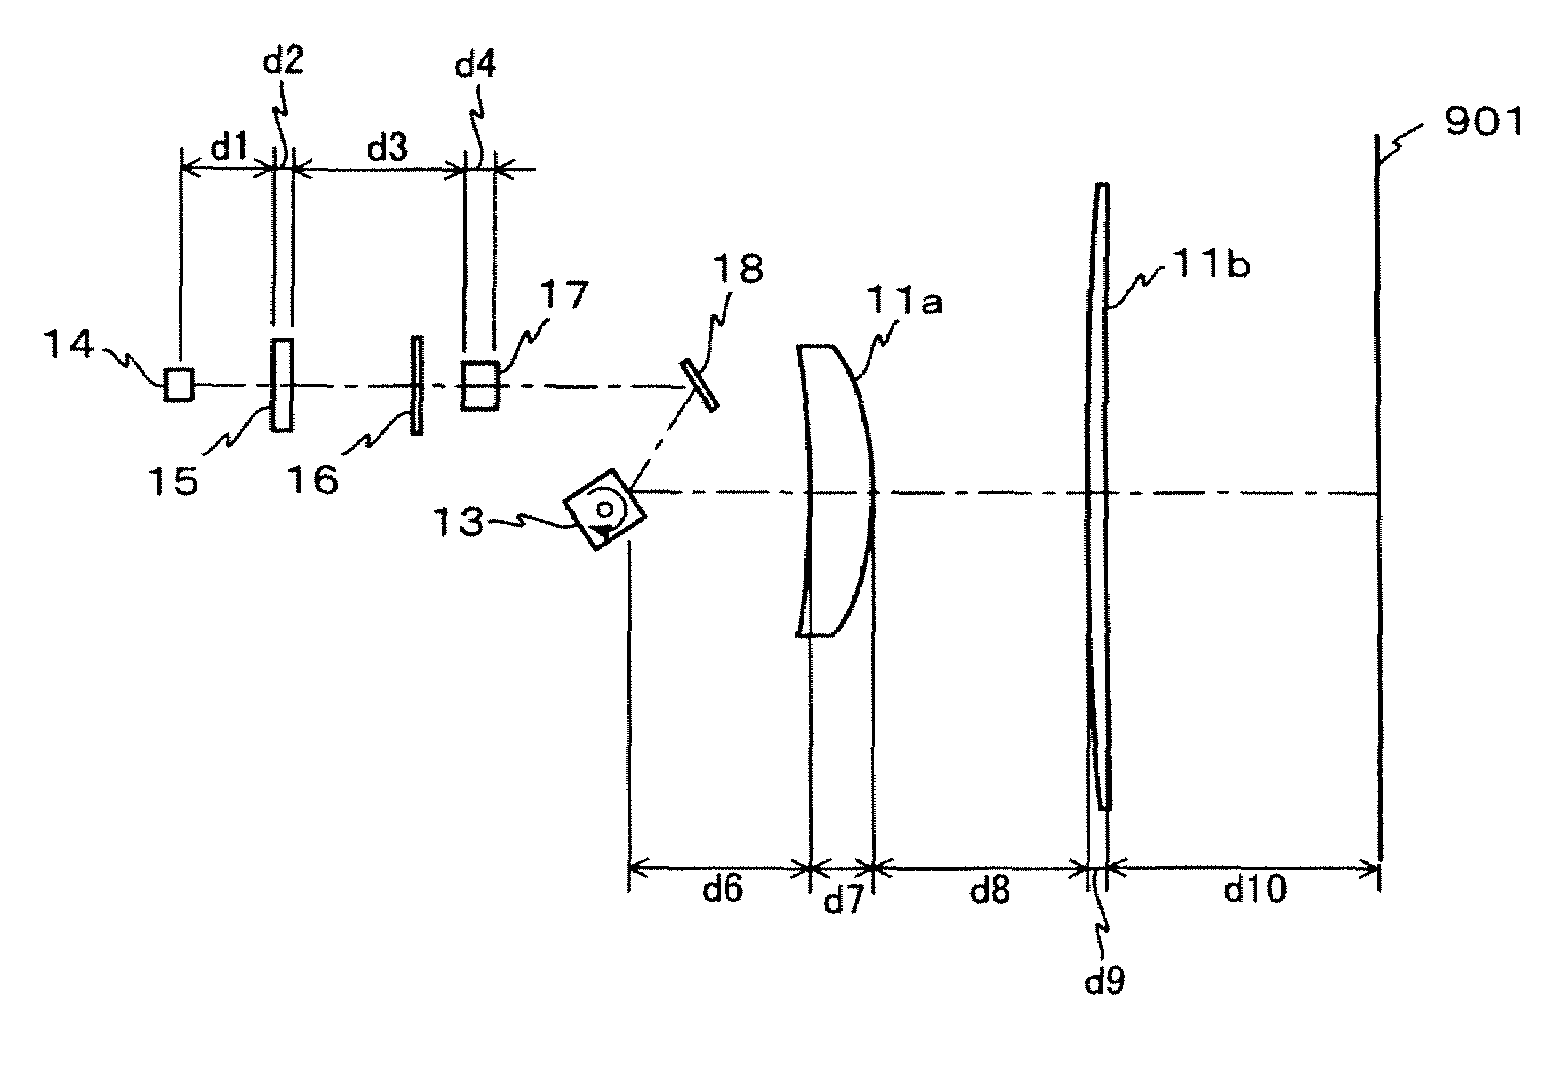 Scanning unit and image forming apparatus